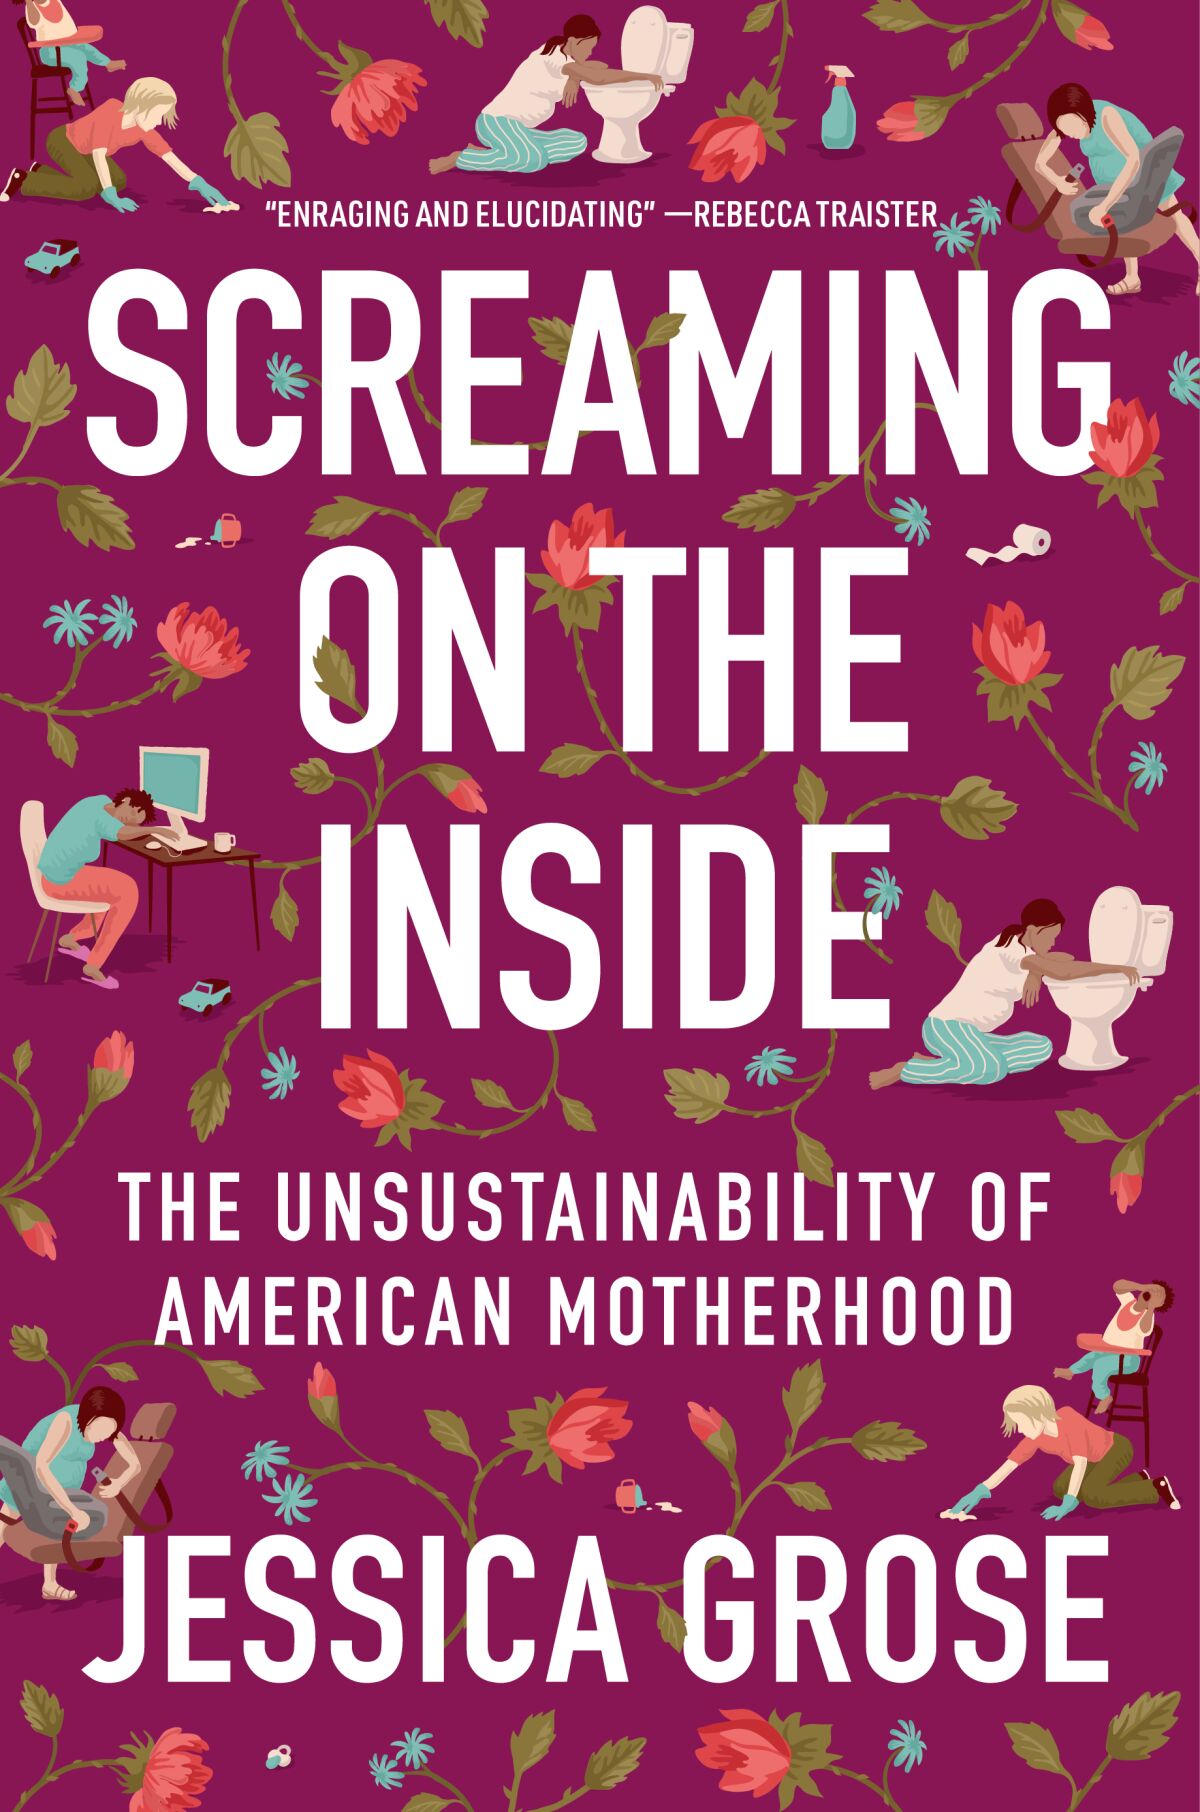 Cover of 'Screaming on the Inside,' by Jessica Grose